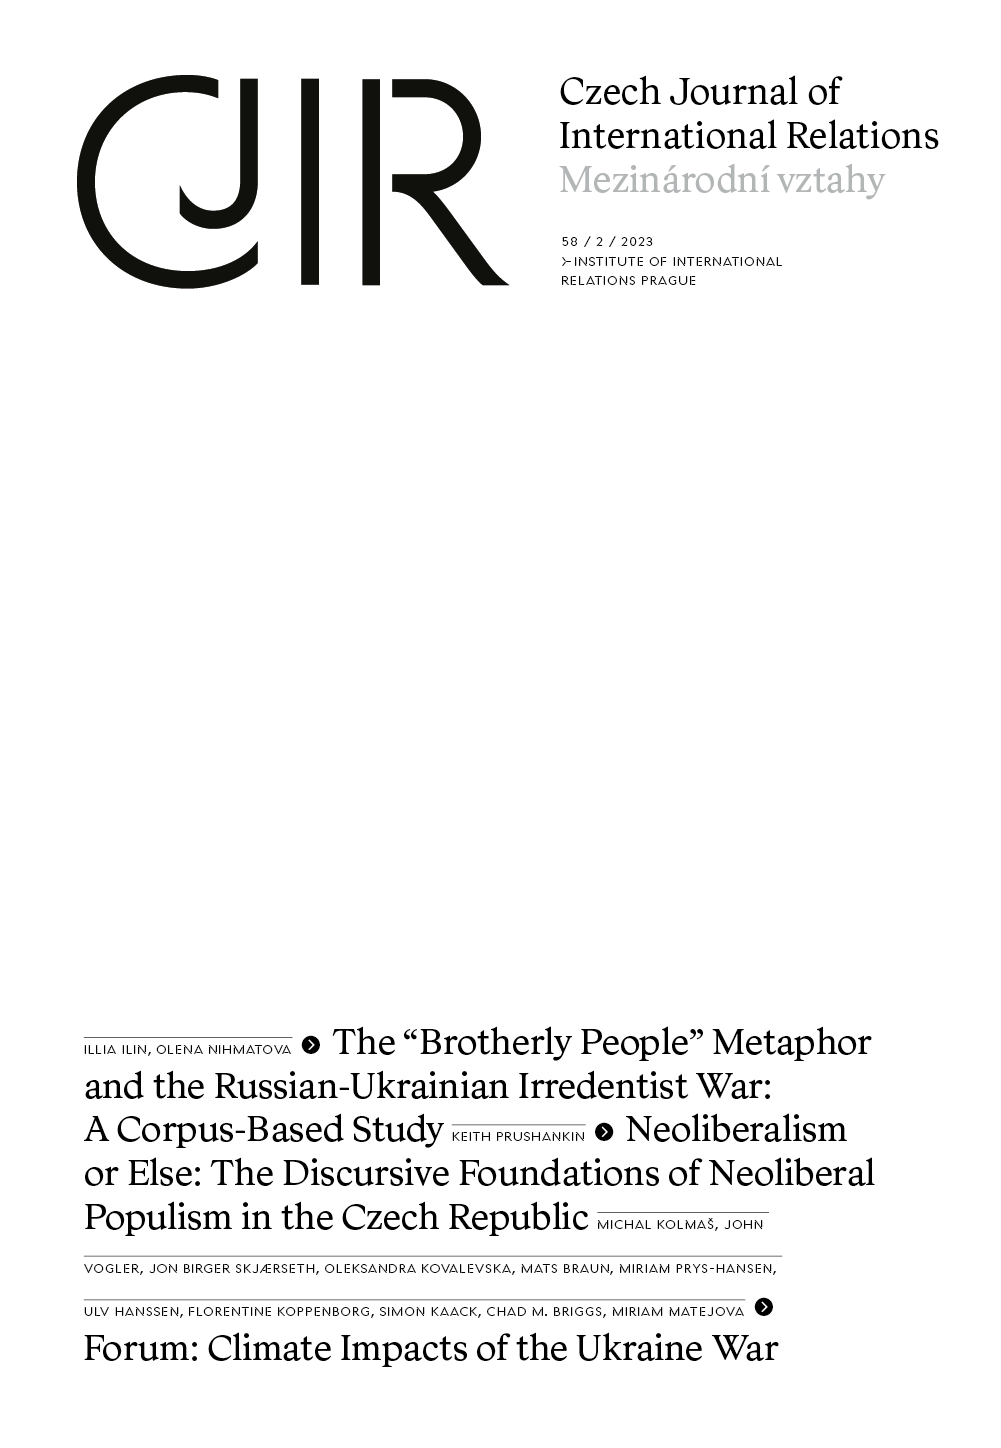 The "Brotherly People" Metaphor and the Russian-Ukrainian Irredentist War: A Corpus-Based Study